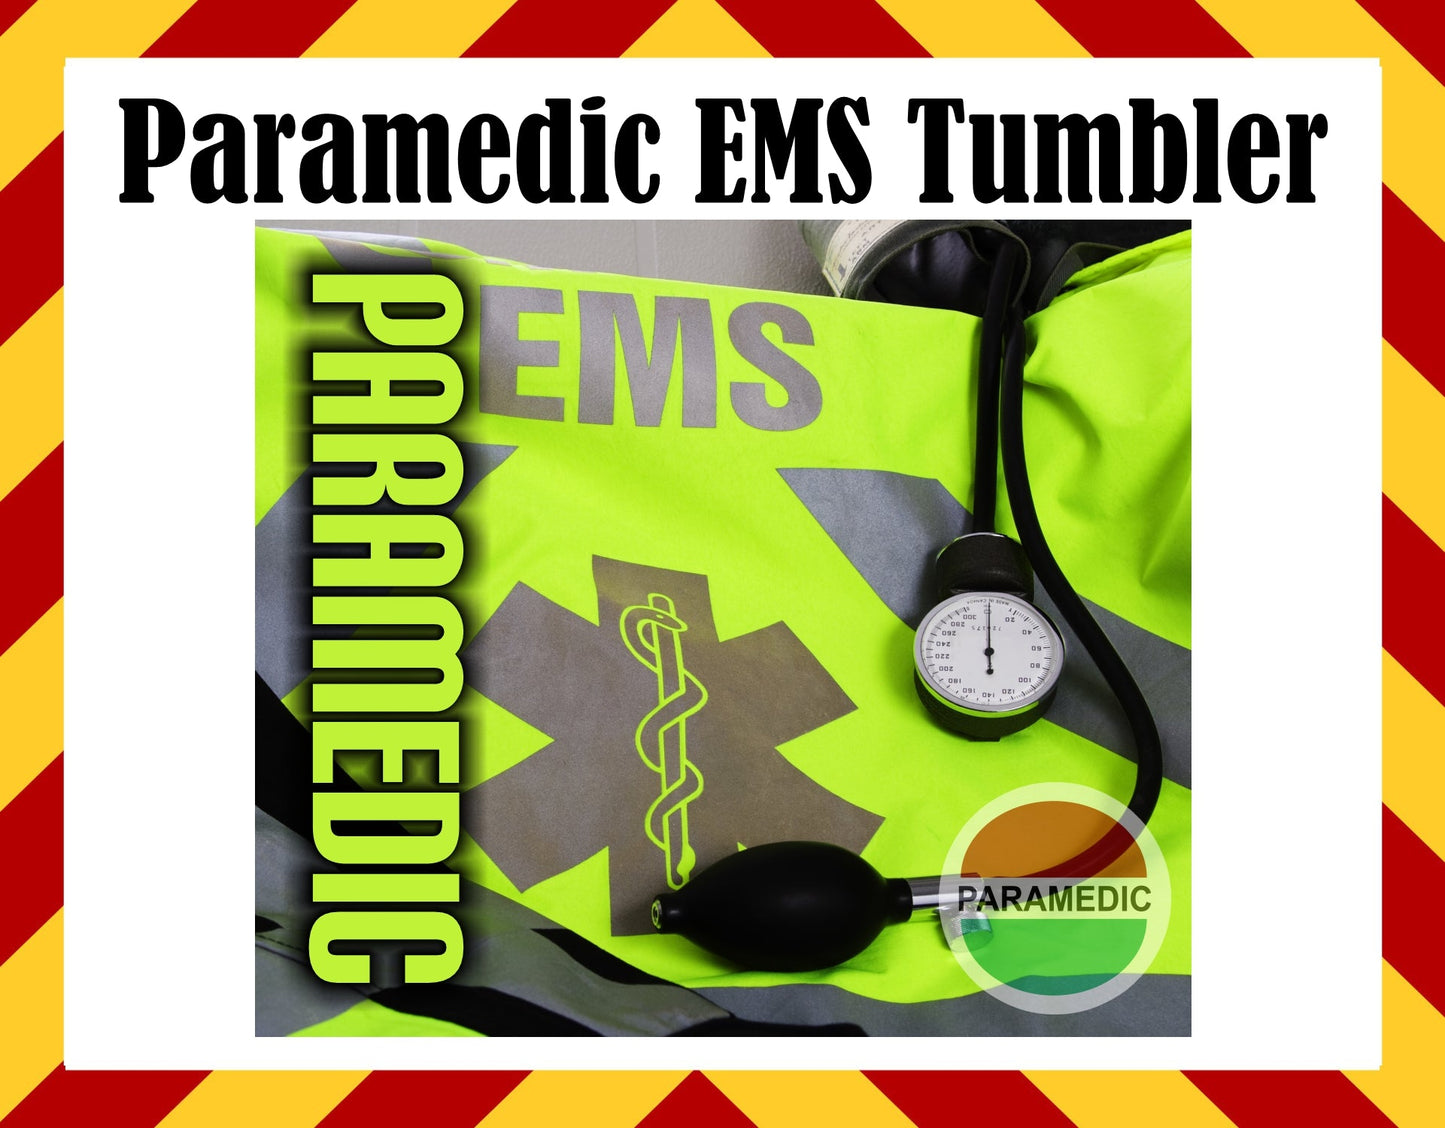 Stainless Steel Cup - Paramedic EMS Design Hot/Cold Cup